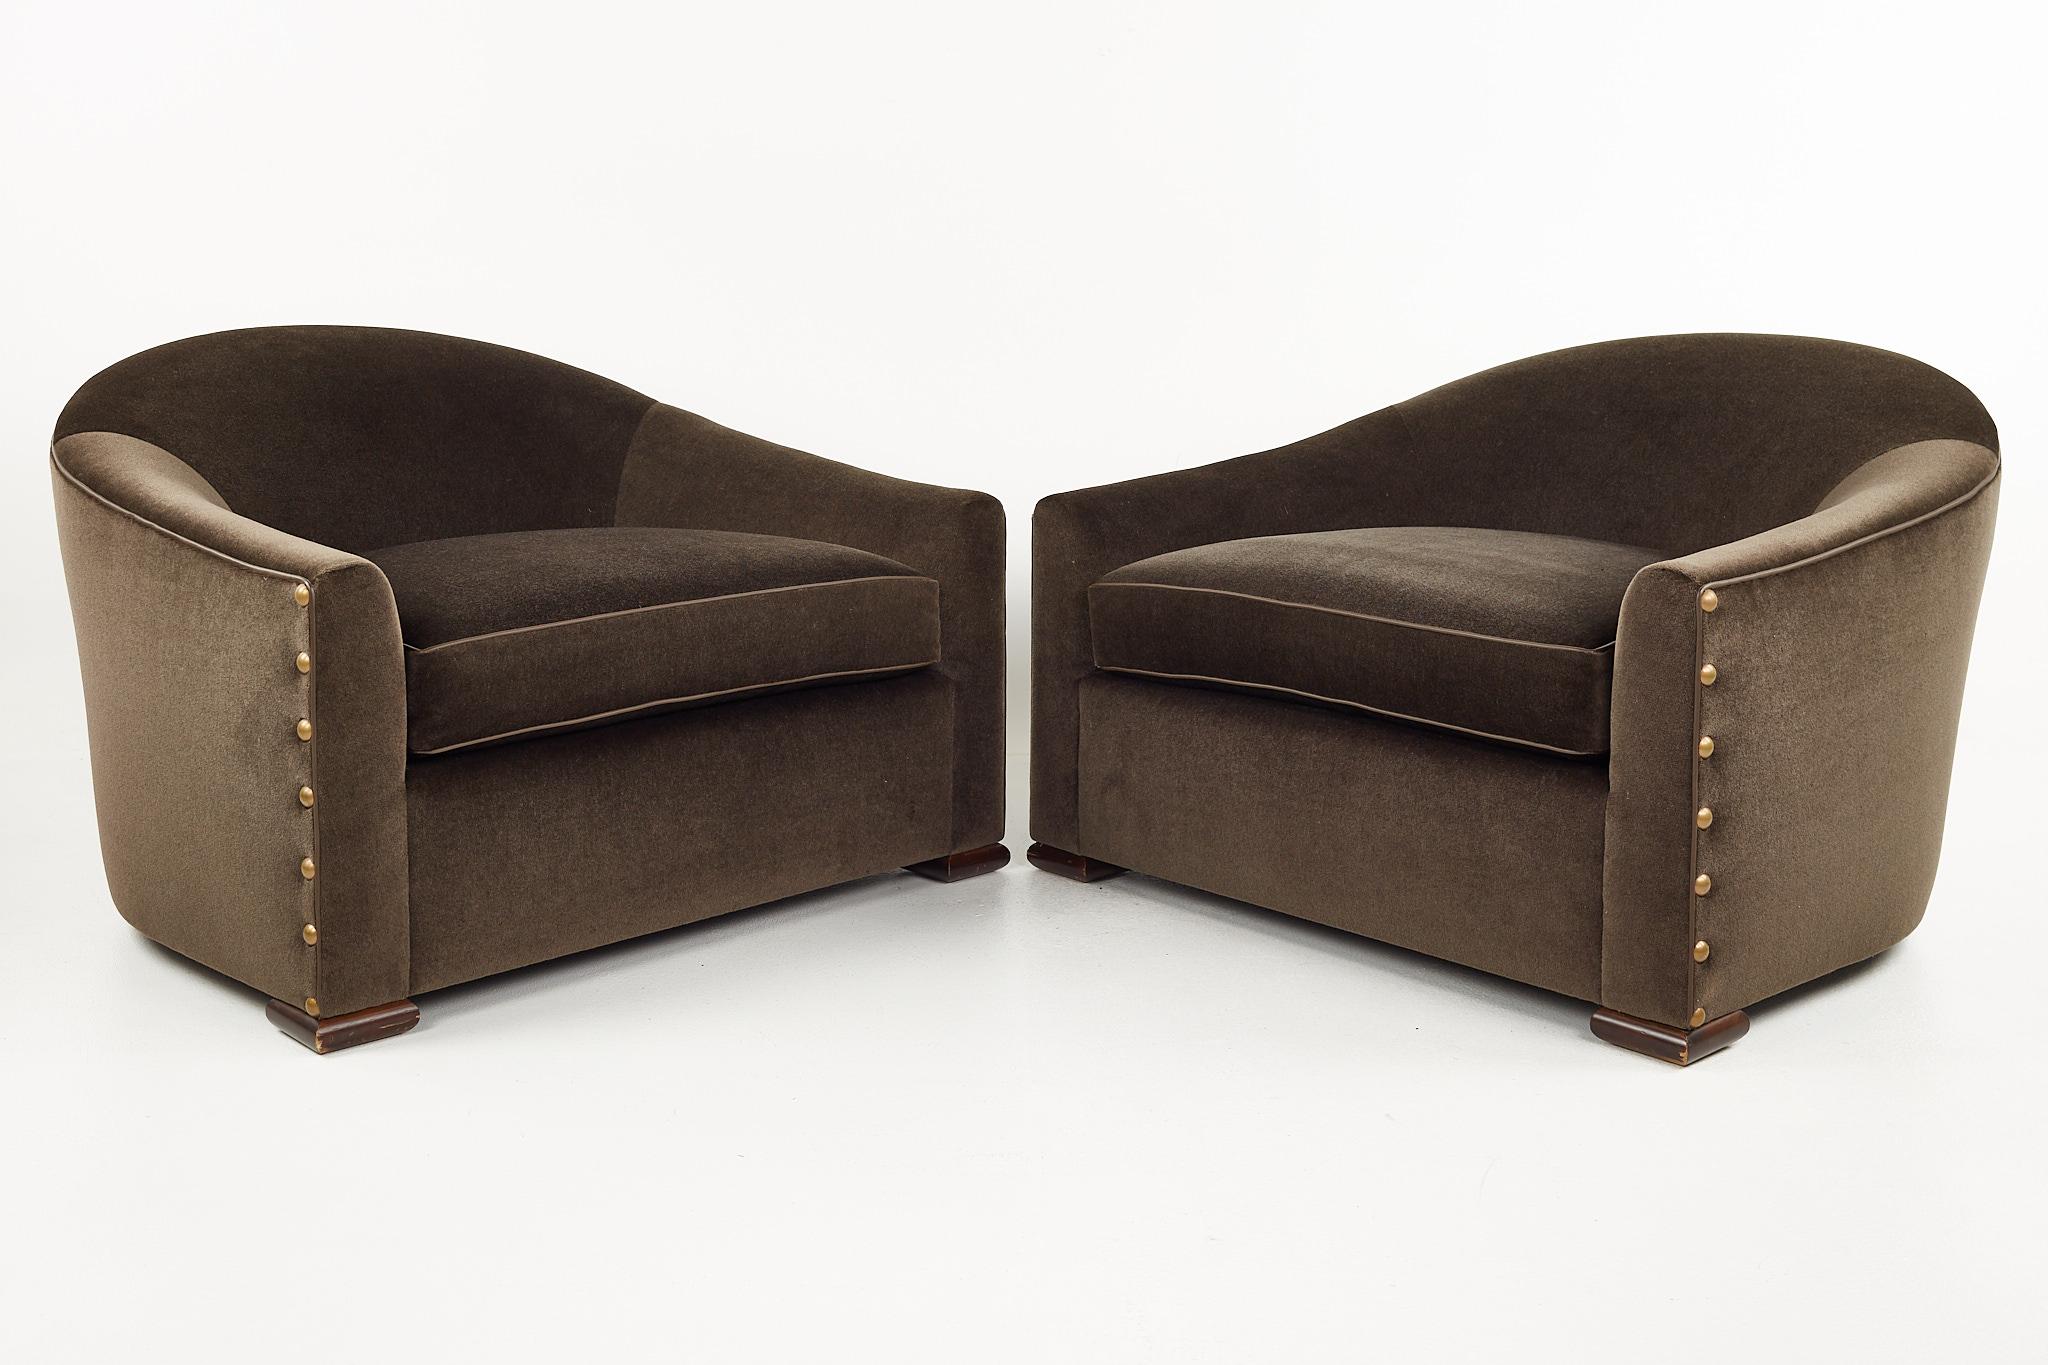 Mattaliano Contemporary Modern Mohair lounge chairs - A pair

This chair measures: 40 wide x 40 deep x 28.5 inches high, with an arm height of 21 inches

All pieces of furniture can be had in what we call restored vintage condition. That means